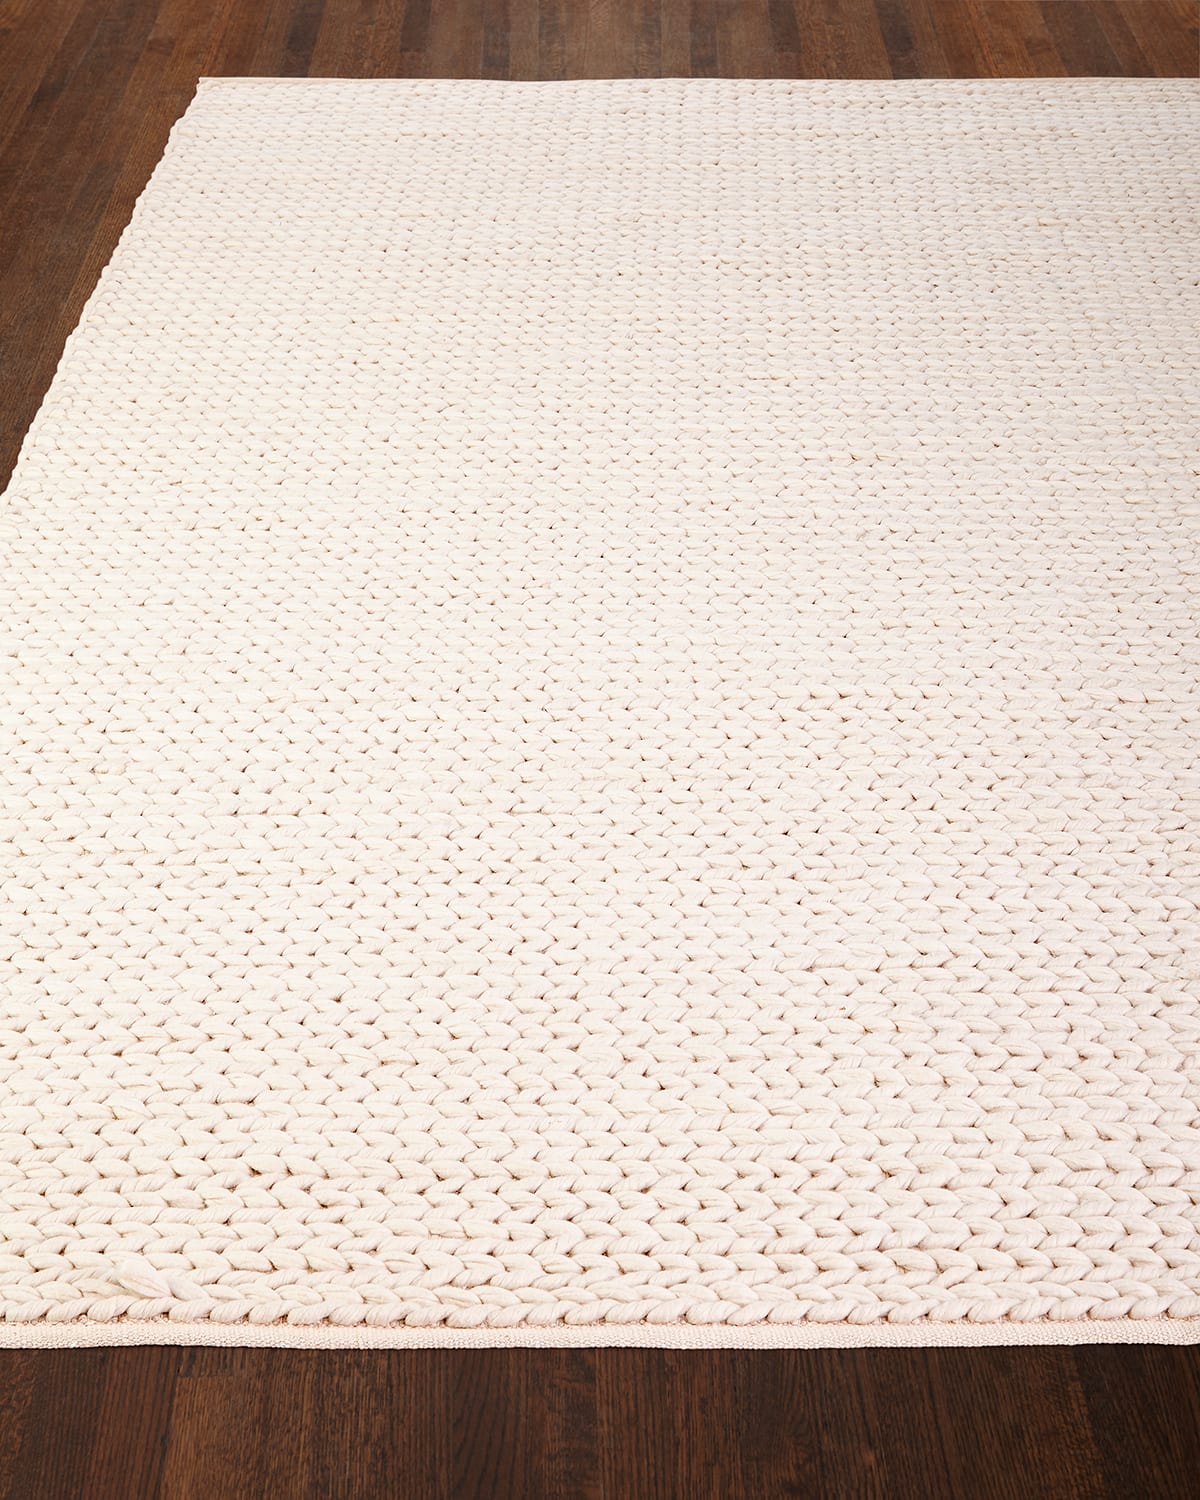 Exquisite Rugs Leonore Hand-loomed Rug, 12' X 15' In Ivory